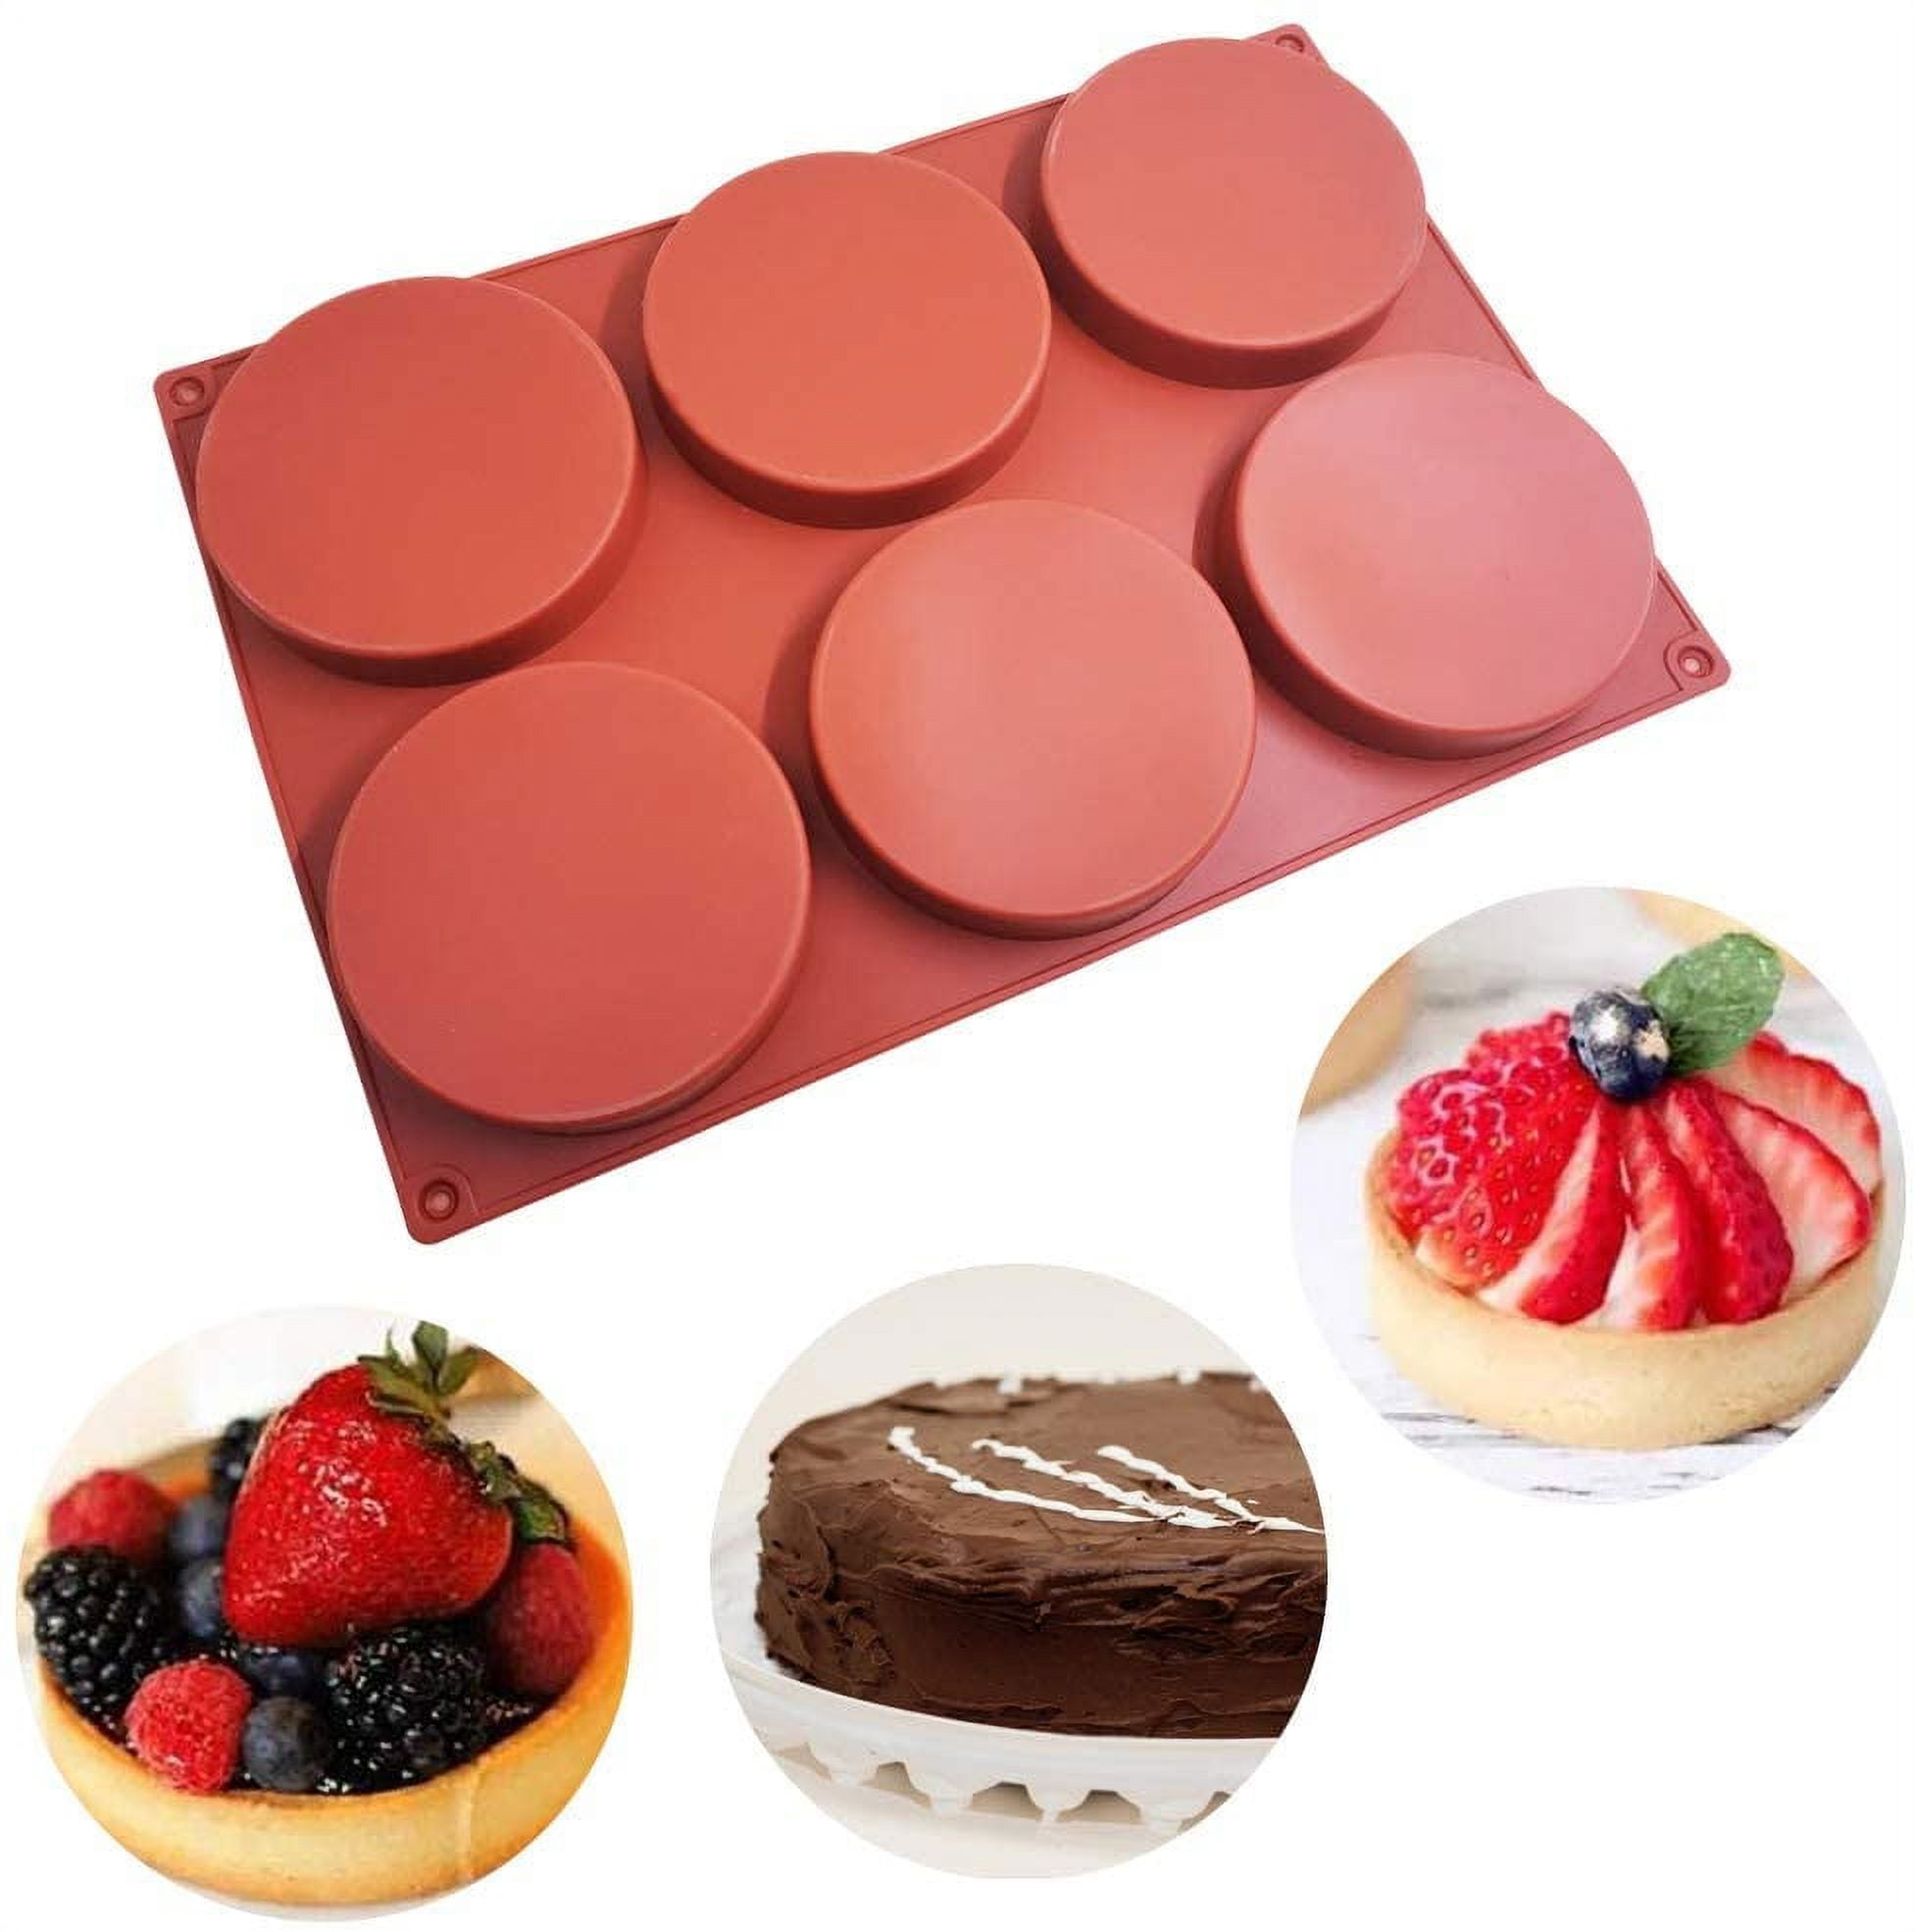  Gandeer 6 Pcs 9 Inch Silicone Round Cake Pans Molds for Baking  Nonstick Quick Release Red Silicone Cake Molds Silicone Bakeware Pan  Cheesecake Pan for Layer Cake, Cheese Cake and Chocolate